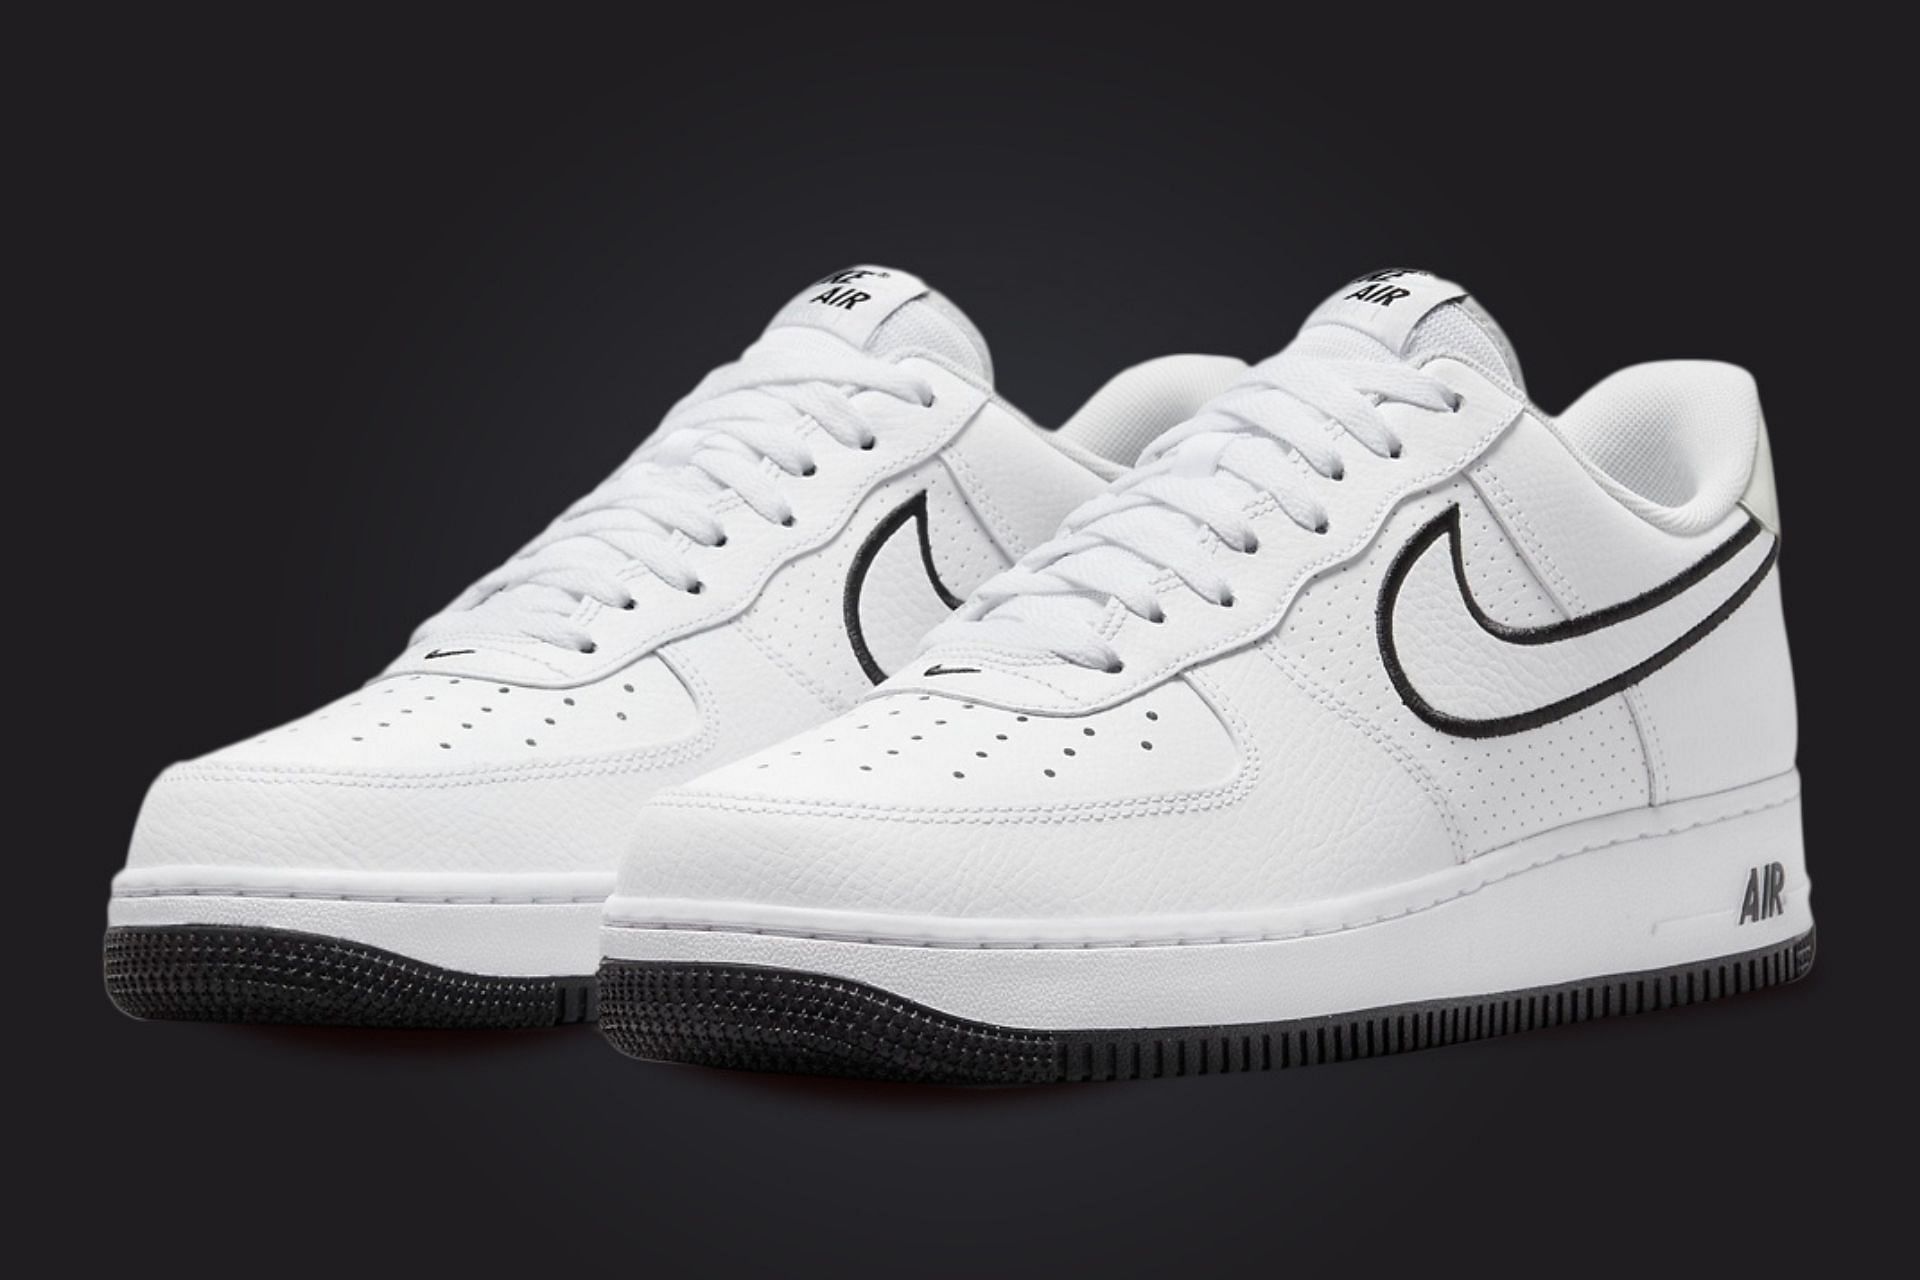 Nike Air Force 1 Low Embroidered Swoosh White/Black shoes (Image via Nike)